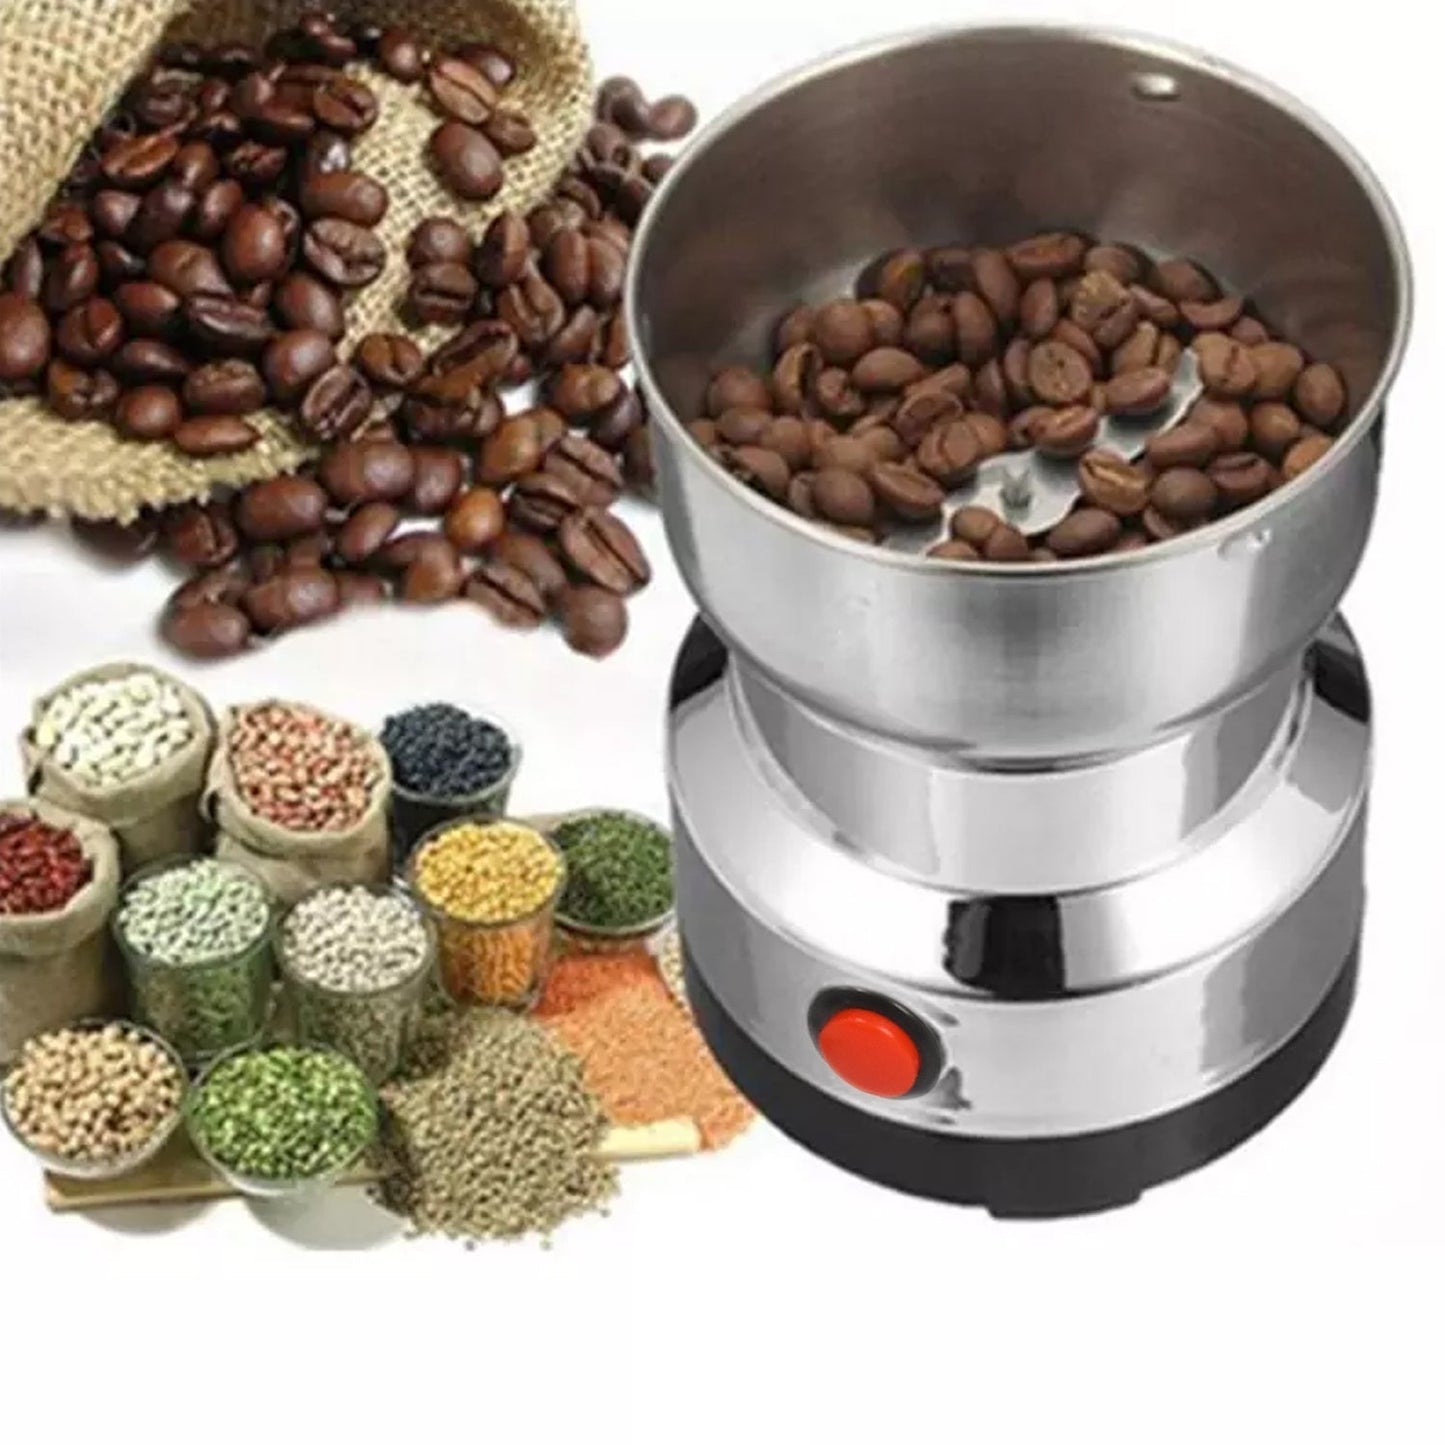 2898 Multifunction Grinder Machine Electric Cereals Grain Mill Spice Herbs Grinding Machine Tool Stainless Steel Electric Coffee Bean for Home JK Trends